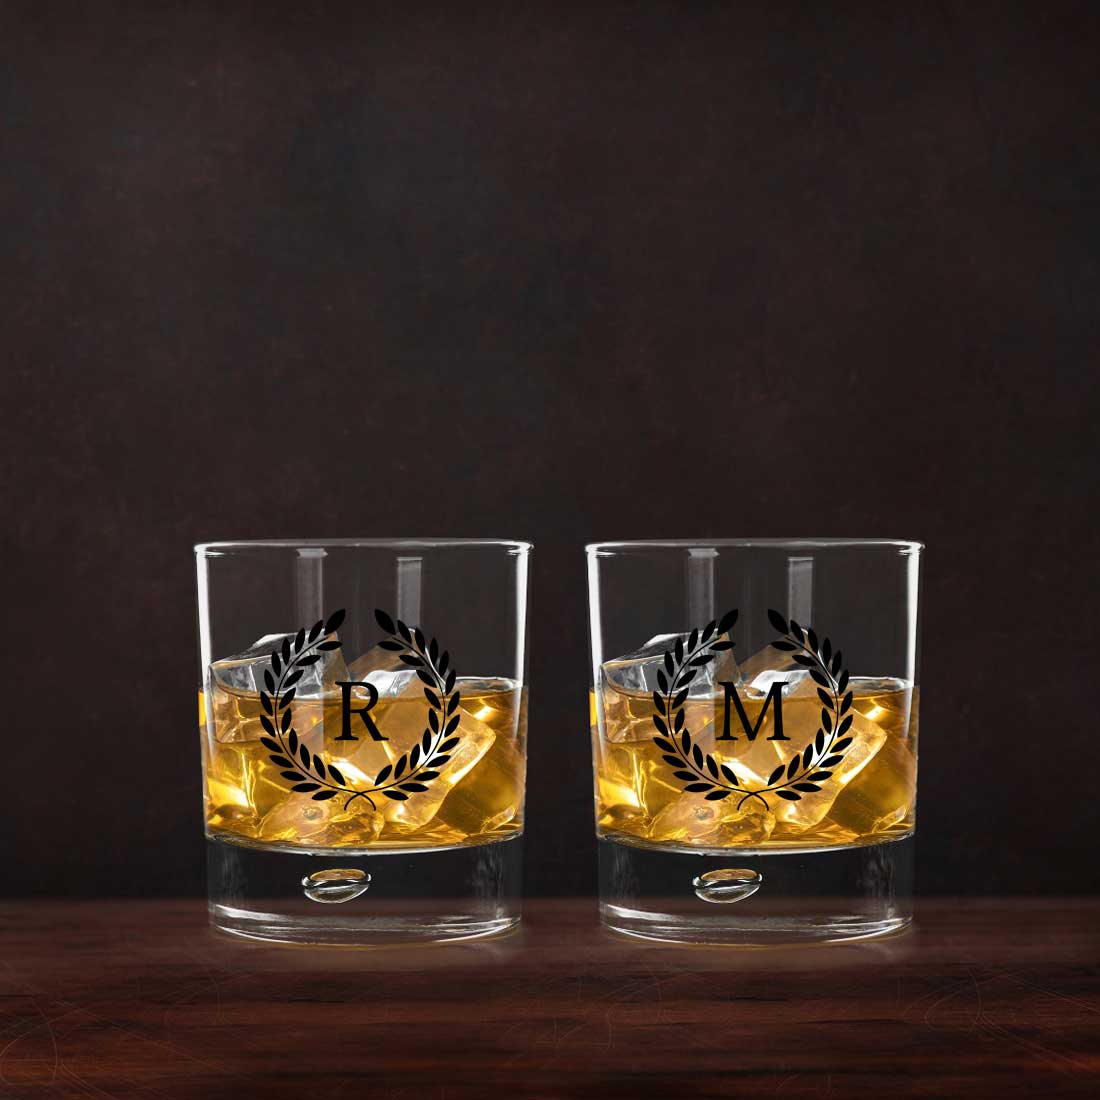 Customized Whiskey Glass with Initials Monogram-Perfect Gift for Boyfriend Husband